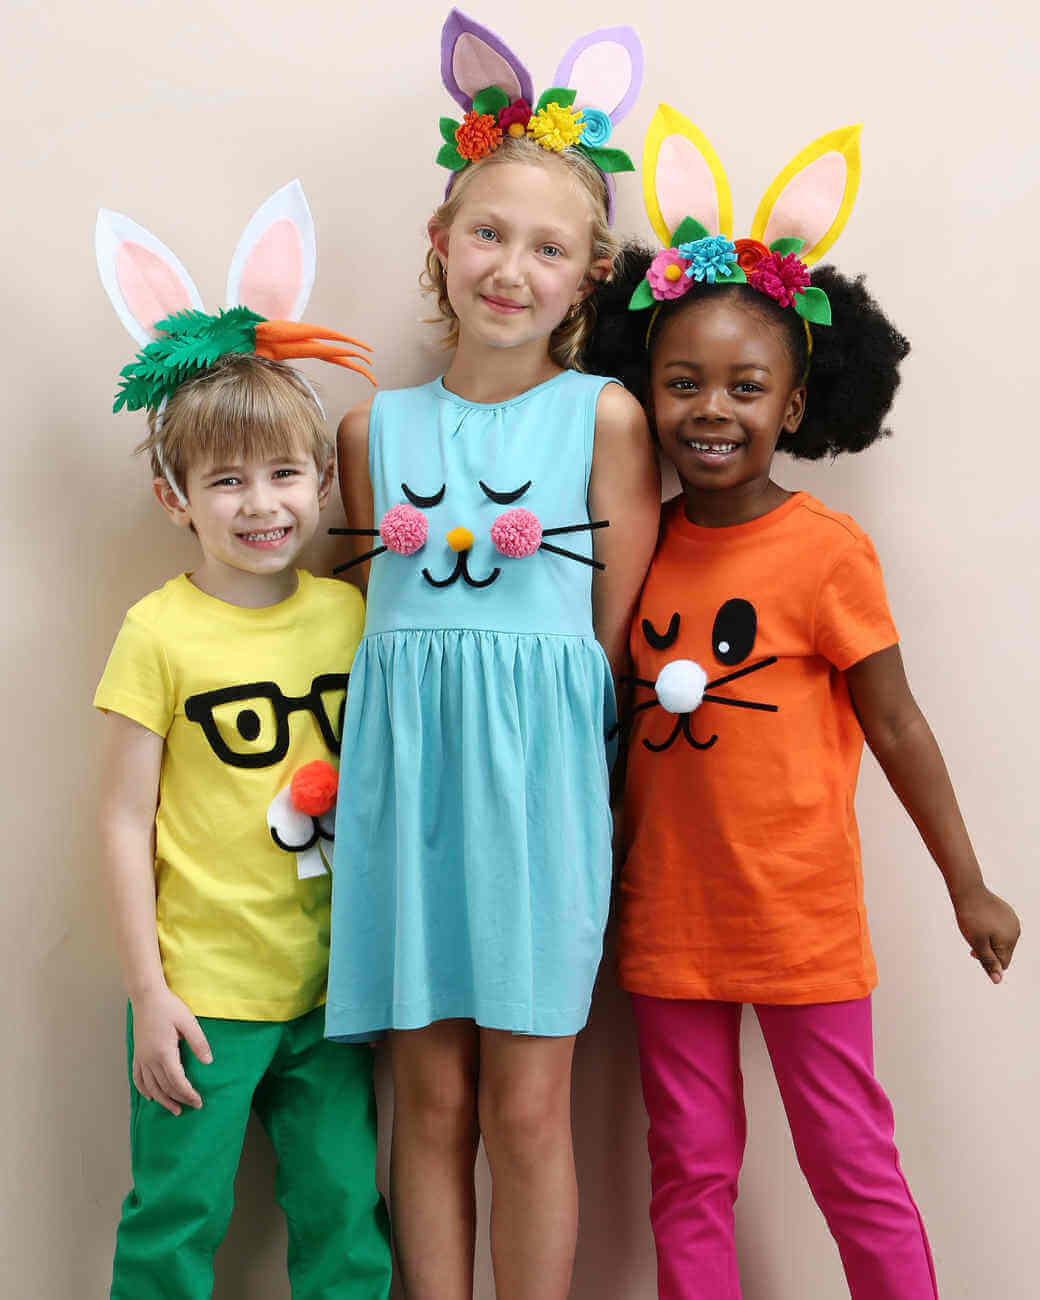 DIY Easter Bunny Outfits Using Shirts, Pom Pom, Pipe Cleaner Whiskers, & Winking Eyes - Easter Outfit Suggestions for Children of All Ages 